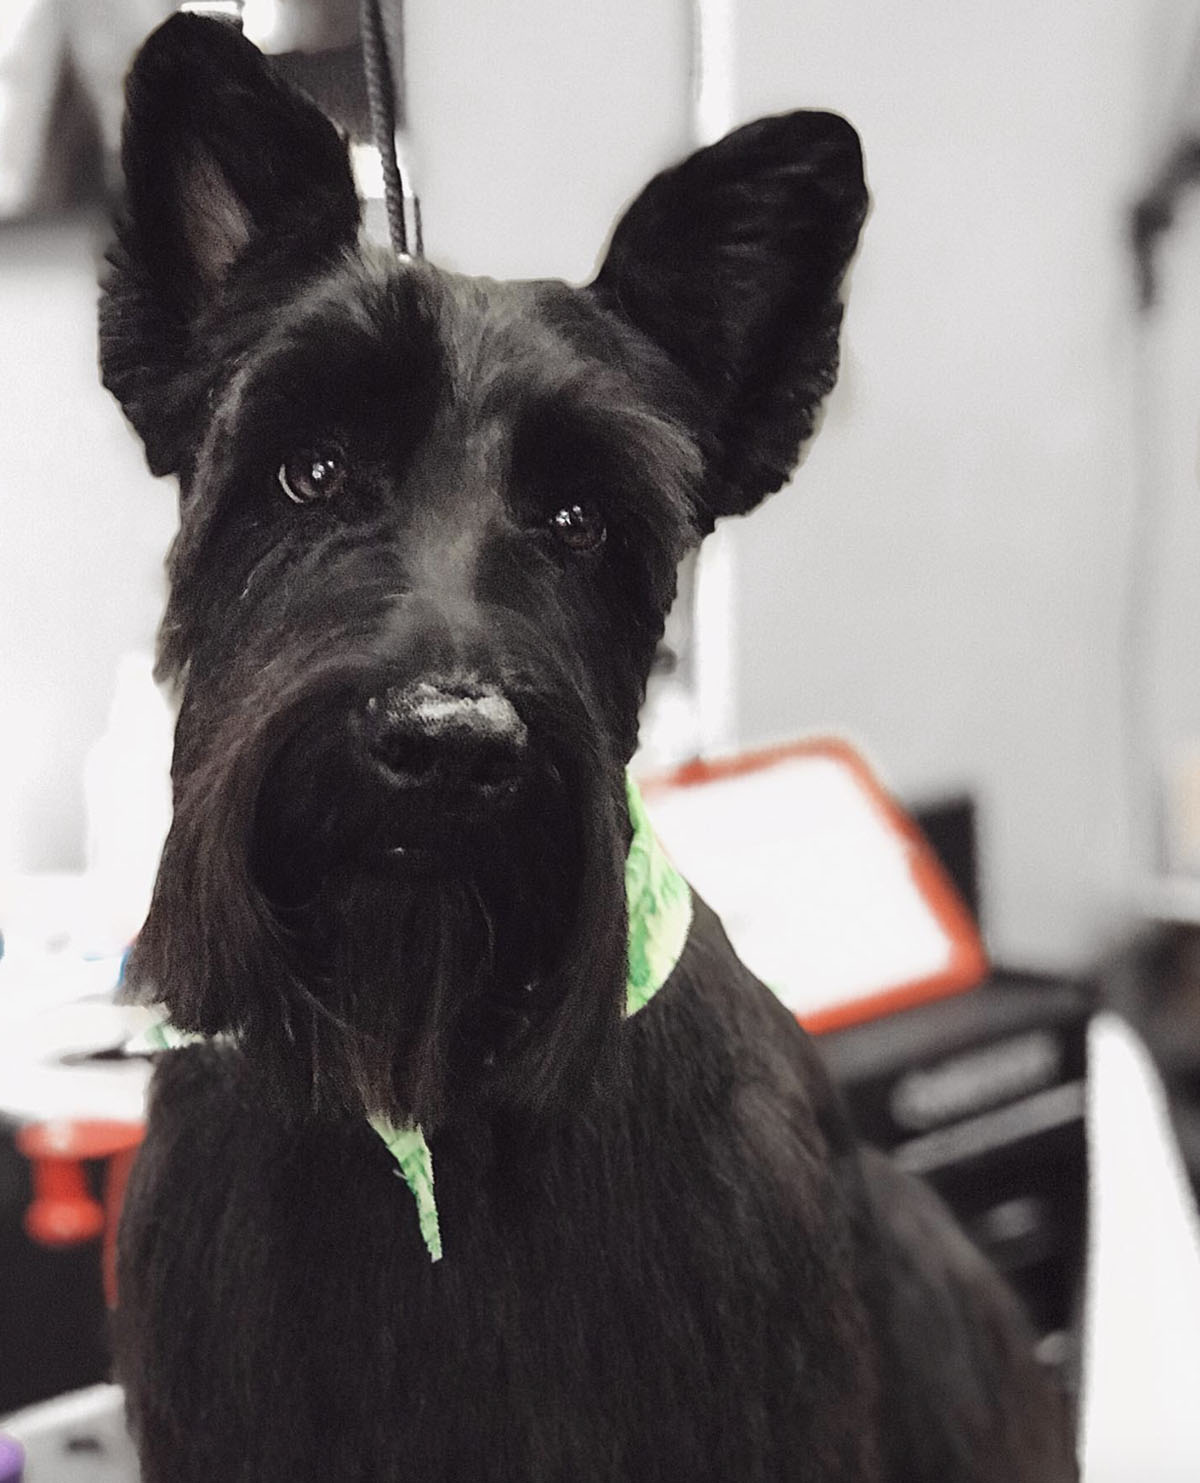 Scottish Terrier groomed at Pampered Pet in Tracy